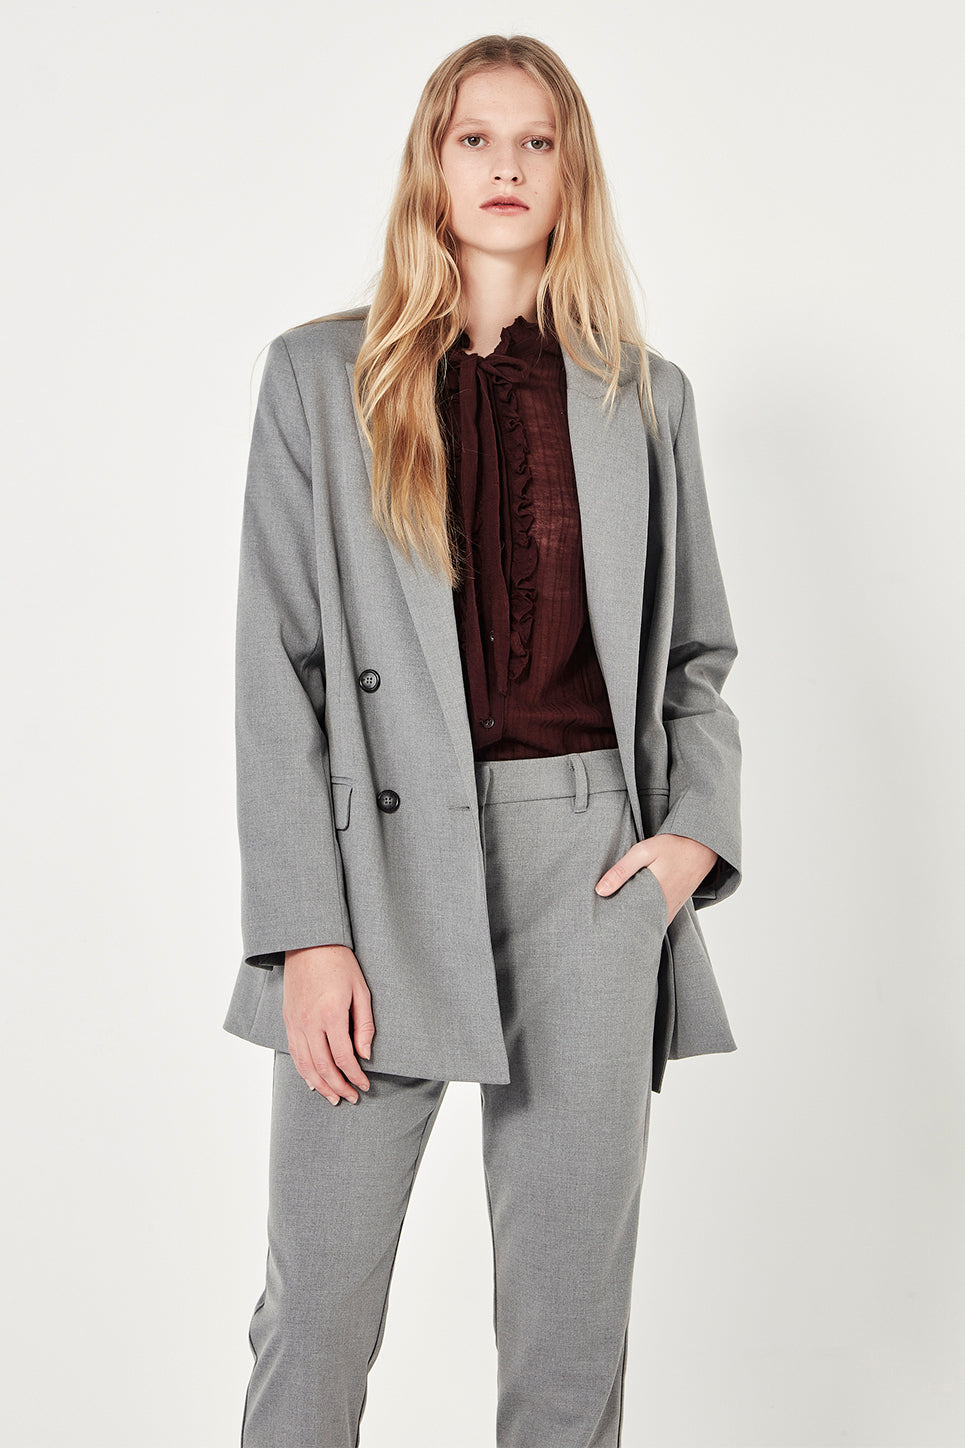 The Leandra Jacket in Anthracite